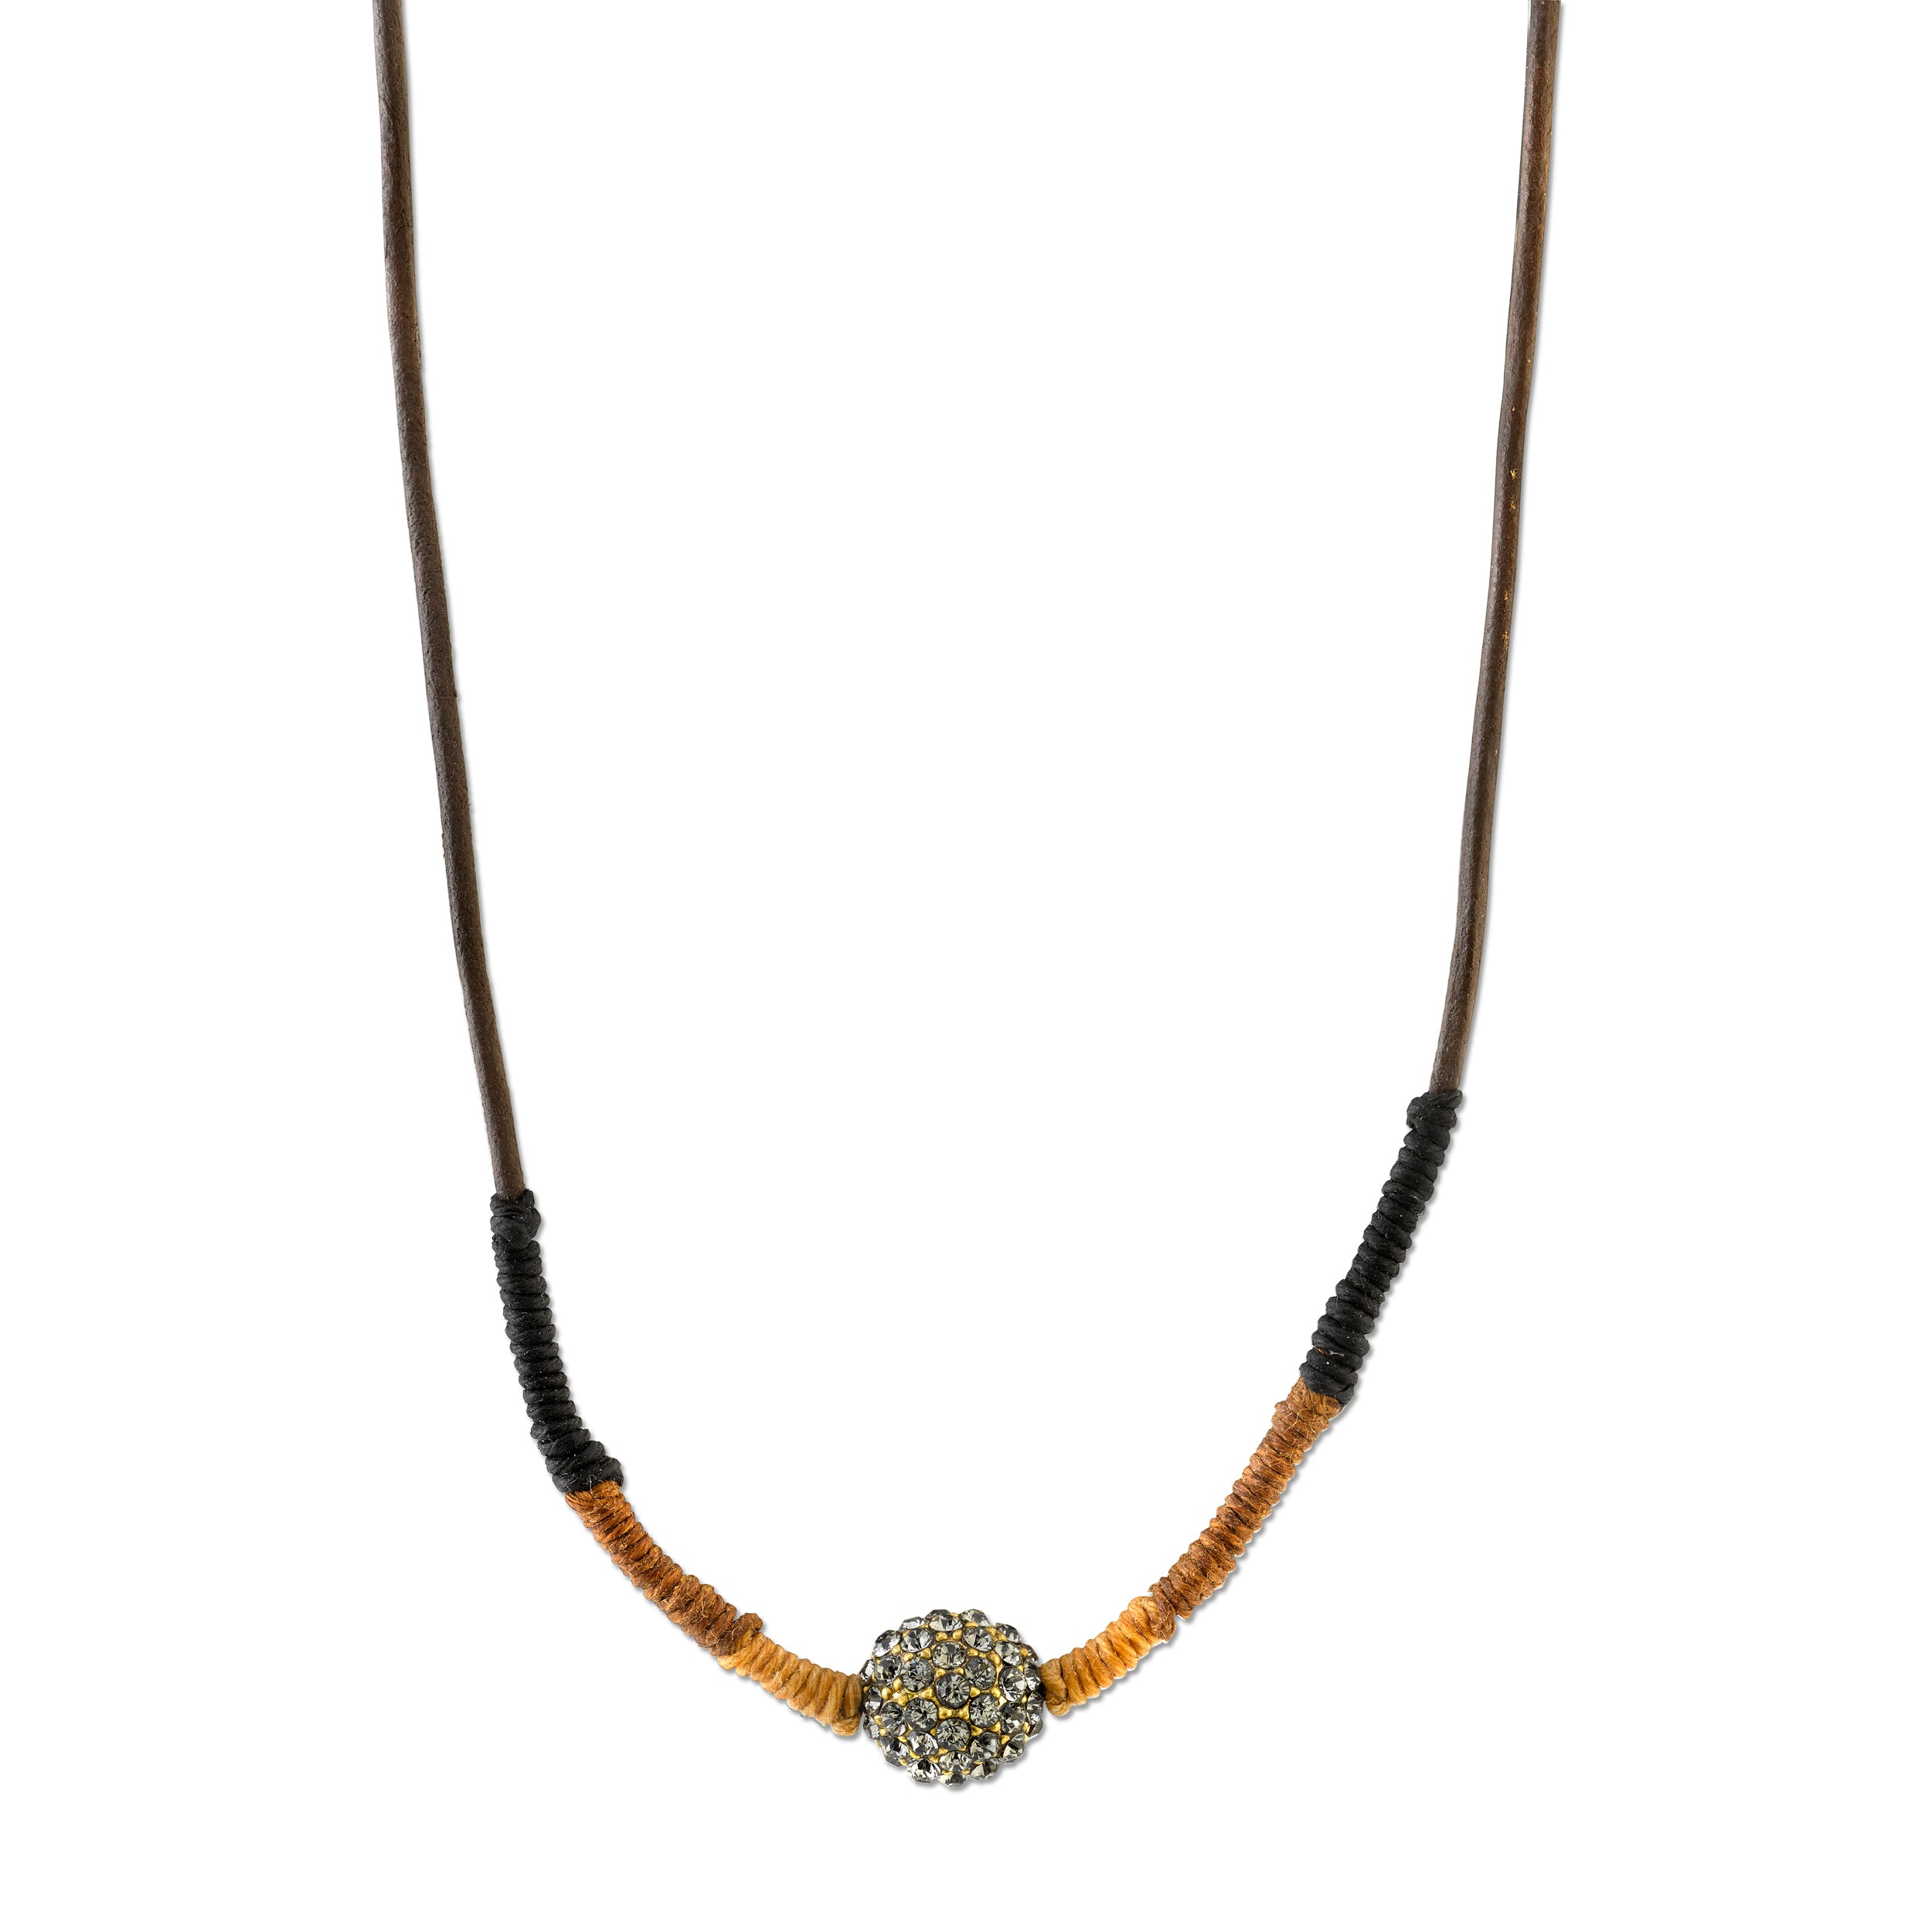 Black thread necklace by Amoliconcepts | The Secret Label